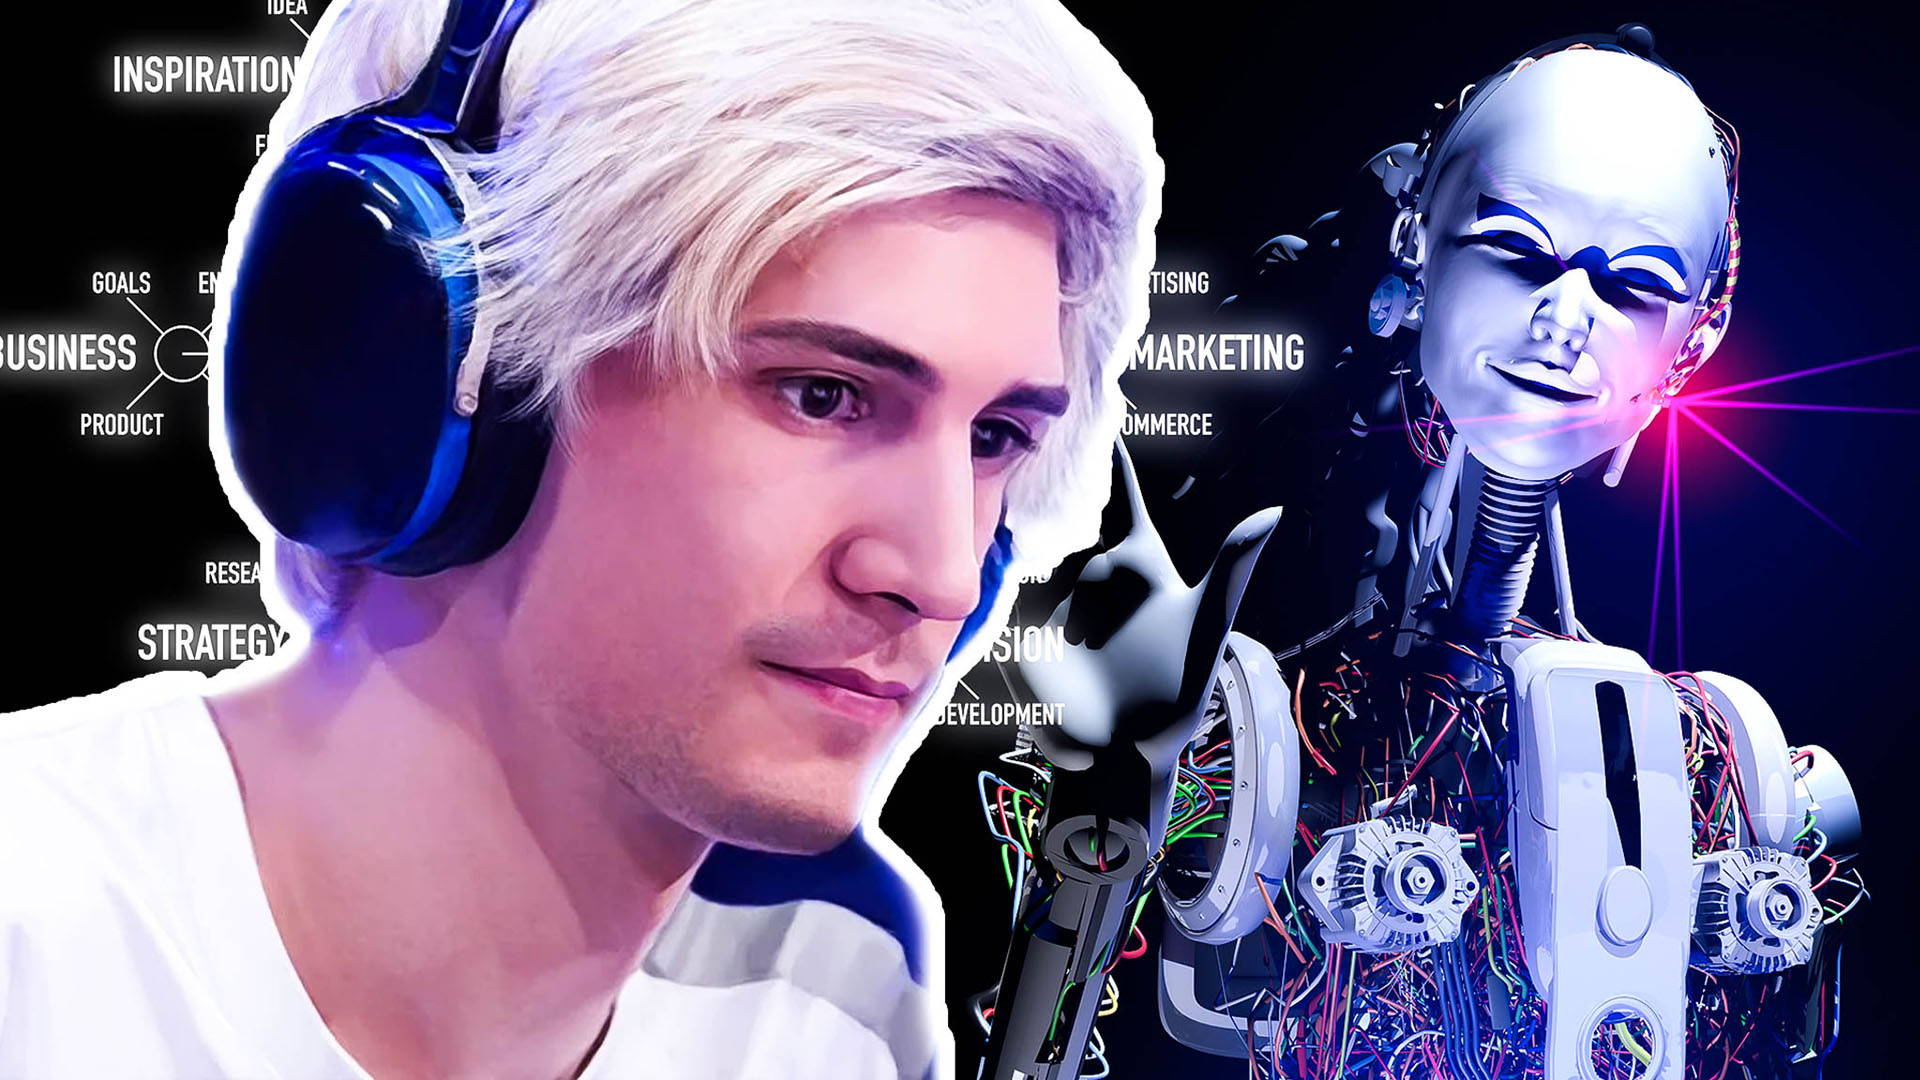 The biggest streamer is leaving Twitch and is being replaced by an AI ...